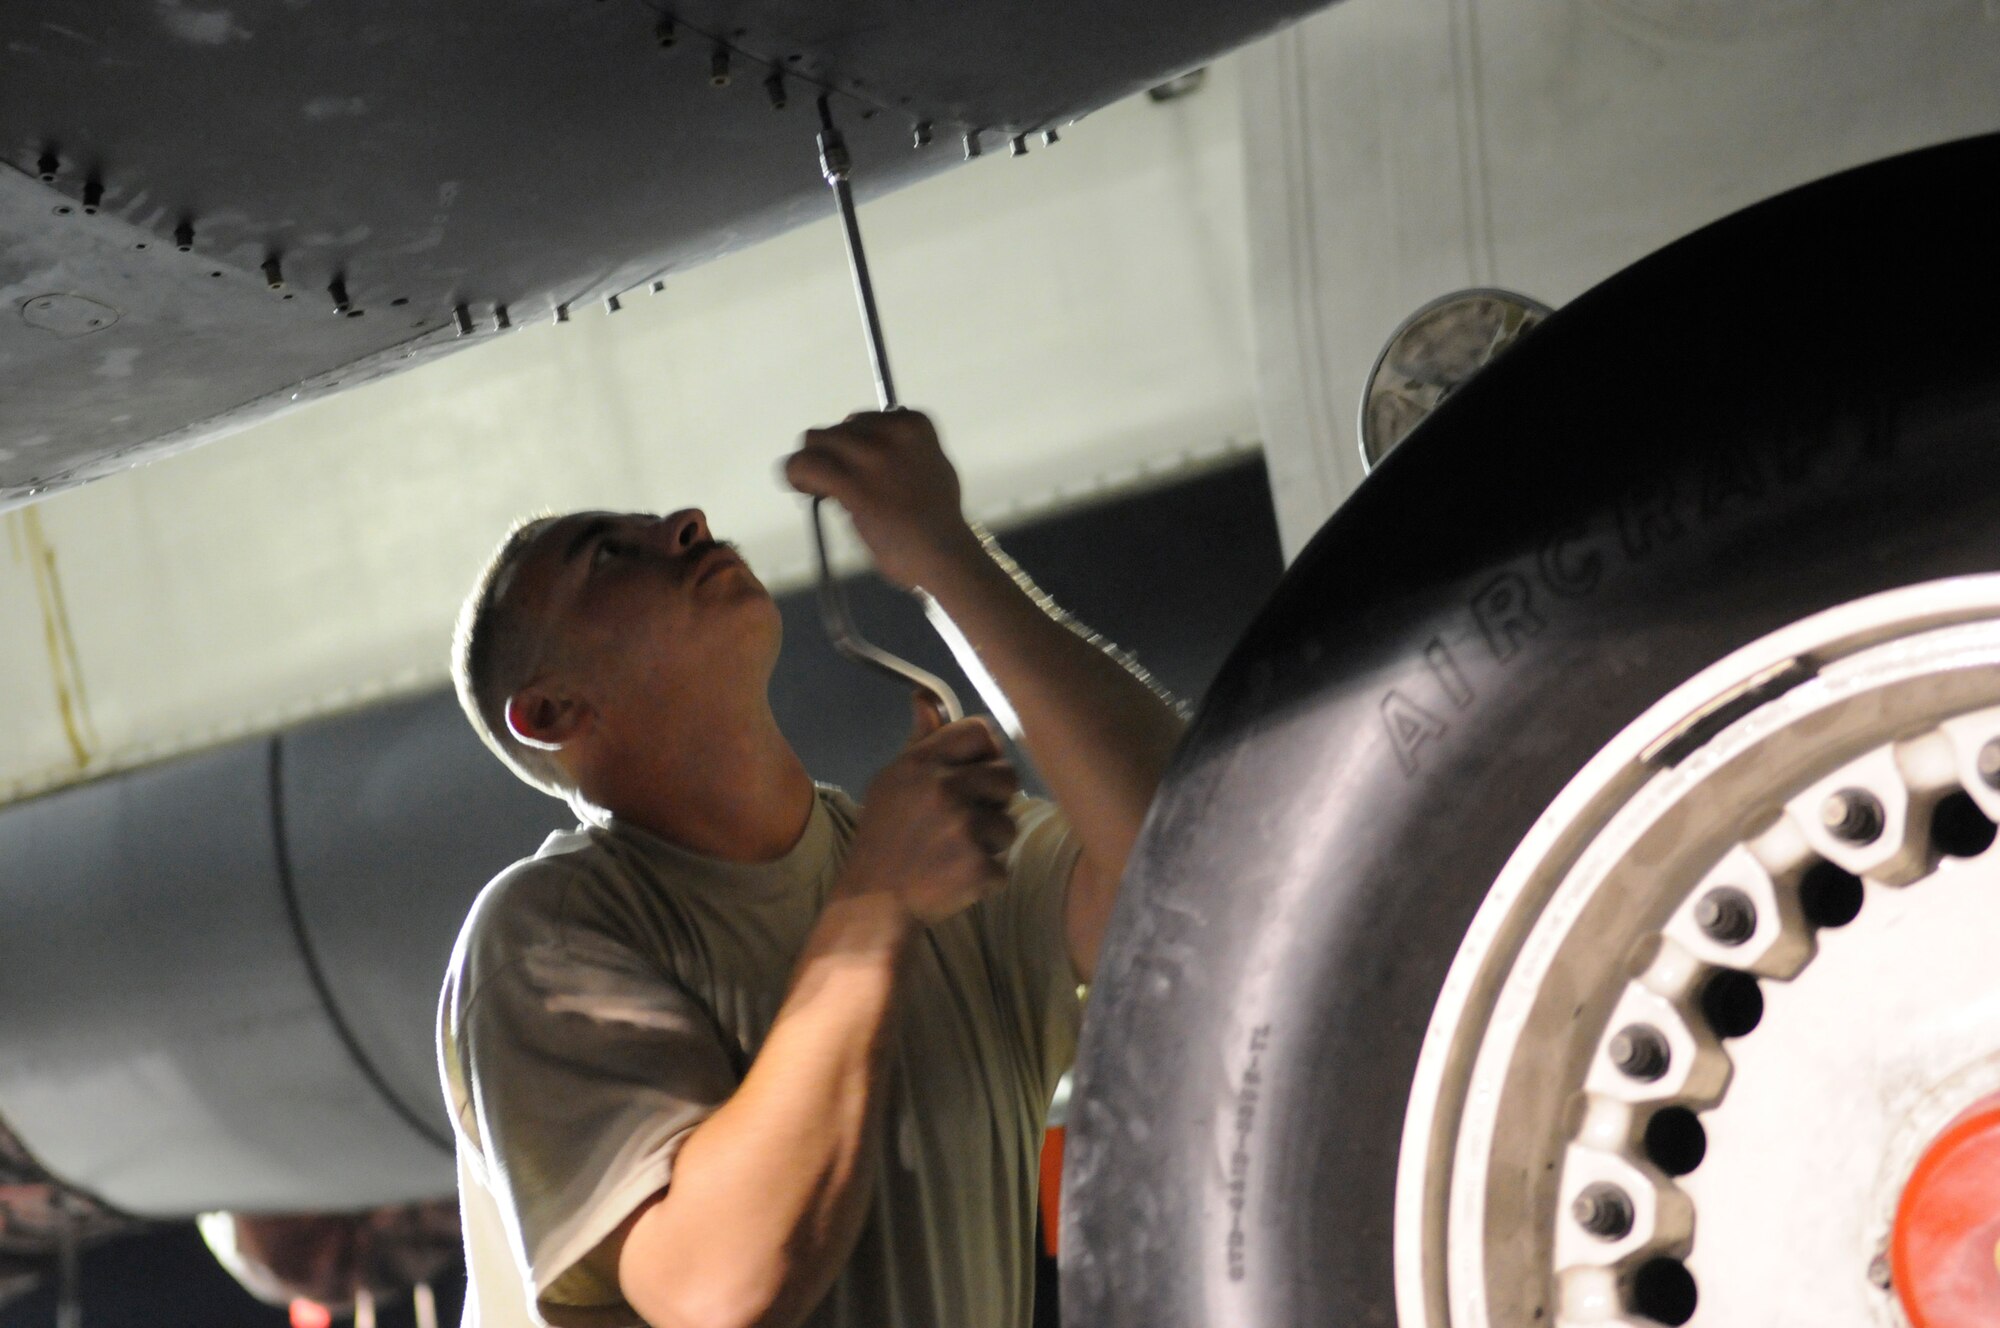 Staff Sgt. Vince Billyk, crew chief assigned to the 379th Expeditionary Aircraft Maintenance Squadron, screws in fasteners on a gearbox panel of a B-1 Lancer, Nov. 24, at an undisclosed air base in Southwest Asia.  Carrying the largest payload of both guided and unguided weapons in the Air Force inventory, the multi-mission B-1 is the backbone of America's long-range bomber force. It can rapidly deliver massive quantities of precision and non-precision weapons against any adversary, anywhere in the Central Command area of responsibility.  Sergeant Billyk is a native of Philadelphia, Pa., and is deployed from Ellsworth Air Force Base, S.D., in support of Operations Iraqi and Enduring Freedom and Joint Task Force-Horn of Africa.  (U.S. Air Force photo by Tech. Sgt. Michael Boquette/Released)